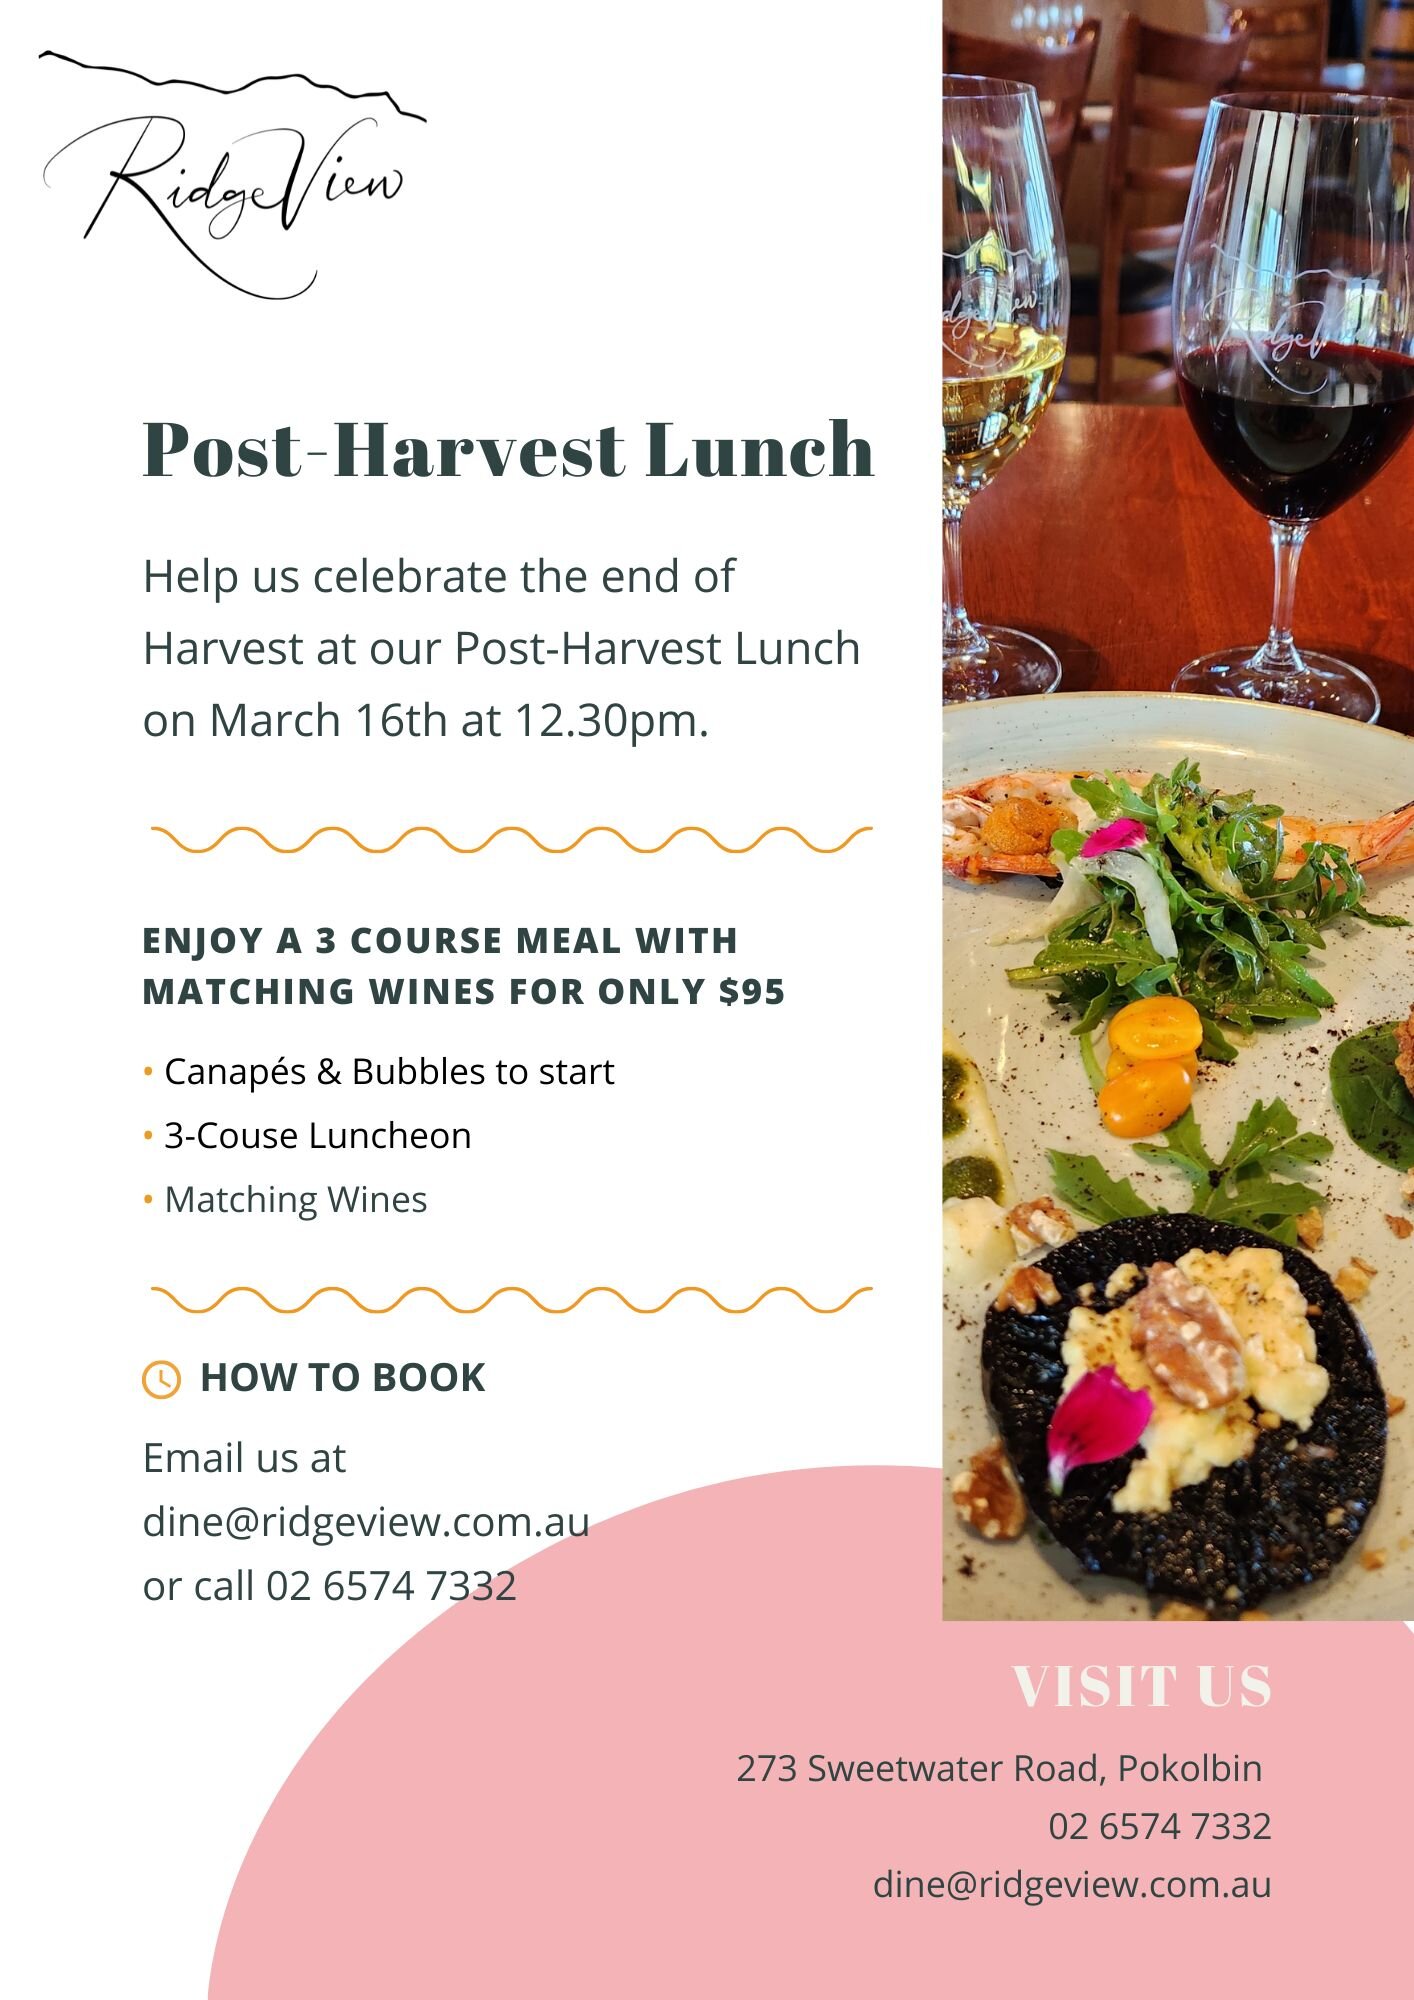 Join us at RidgeView for our annual Post-Harvest Lunch. Our Chef has planned a 3-course lunch with matching wines for you to enjoy in our restaurant looking out over the vines. Contact us at dine@Ridgeview.com.au or on 02 65744 7332 to book.
Menu in 